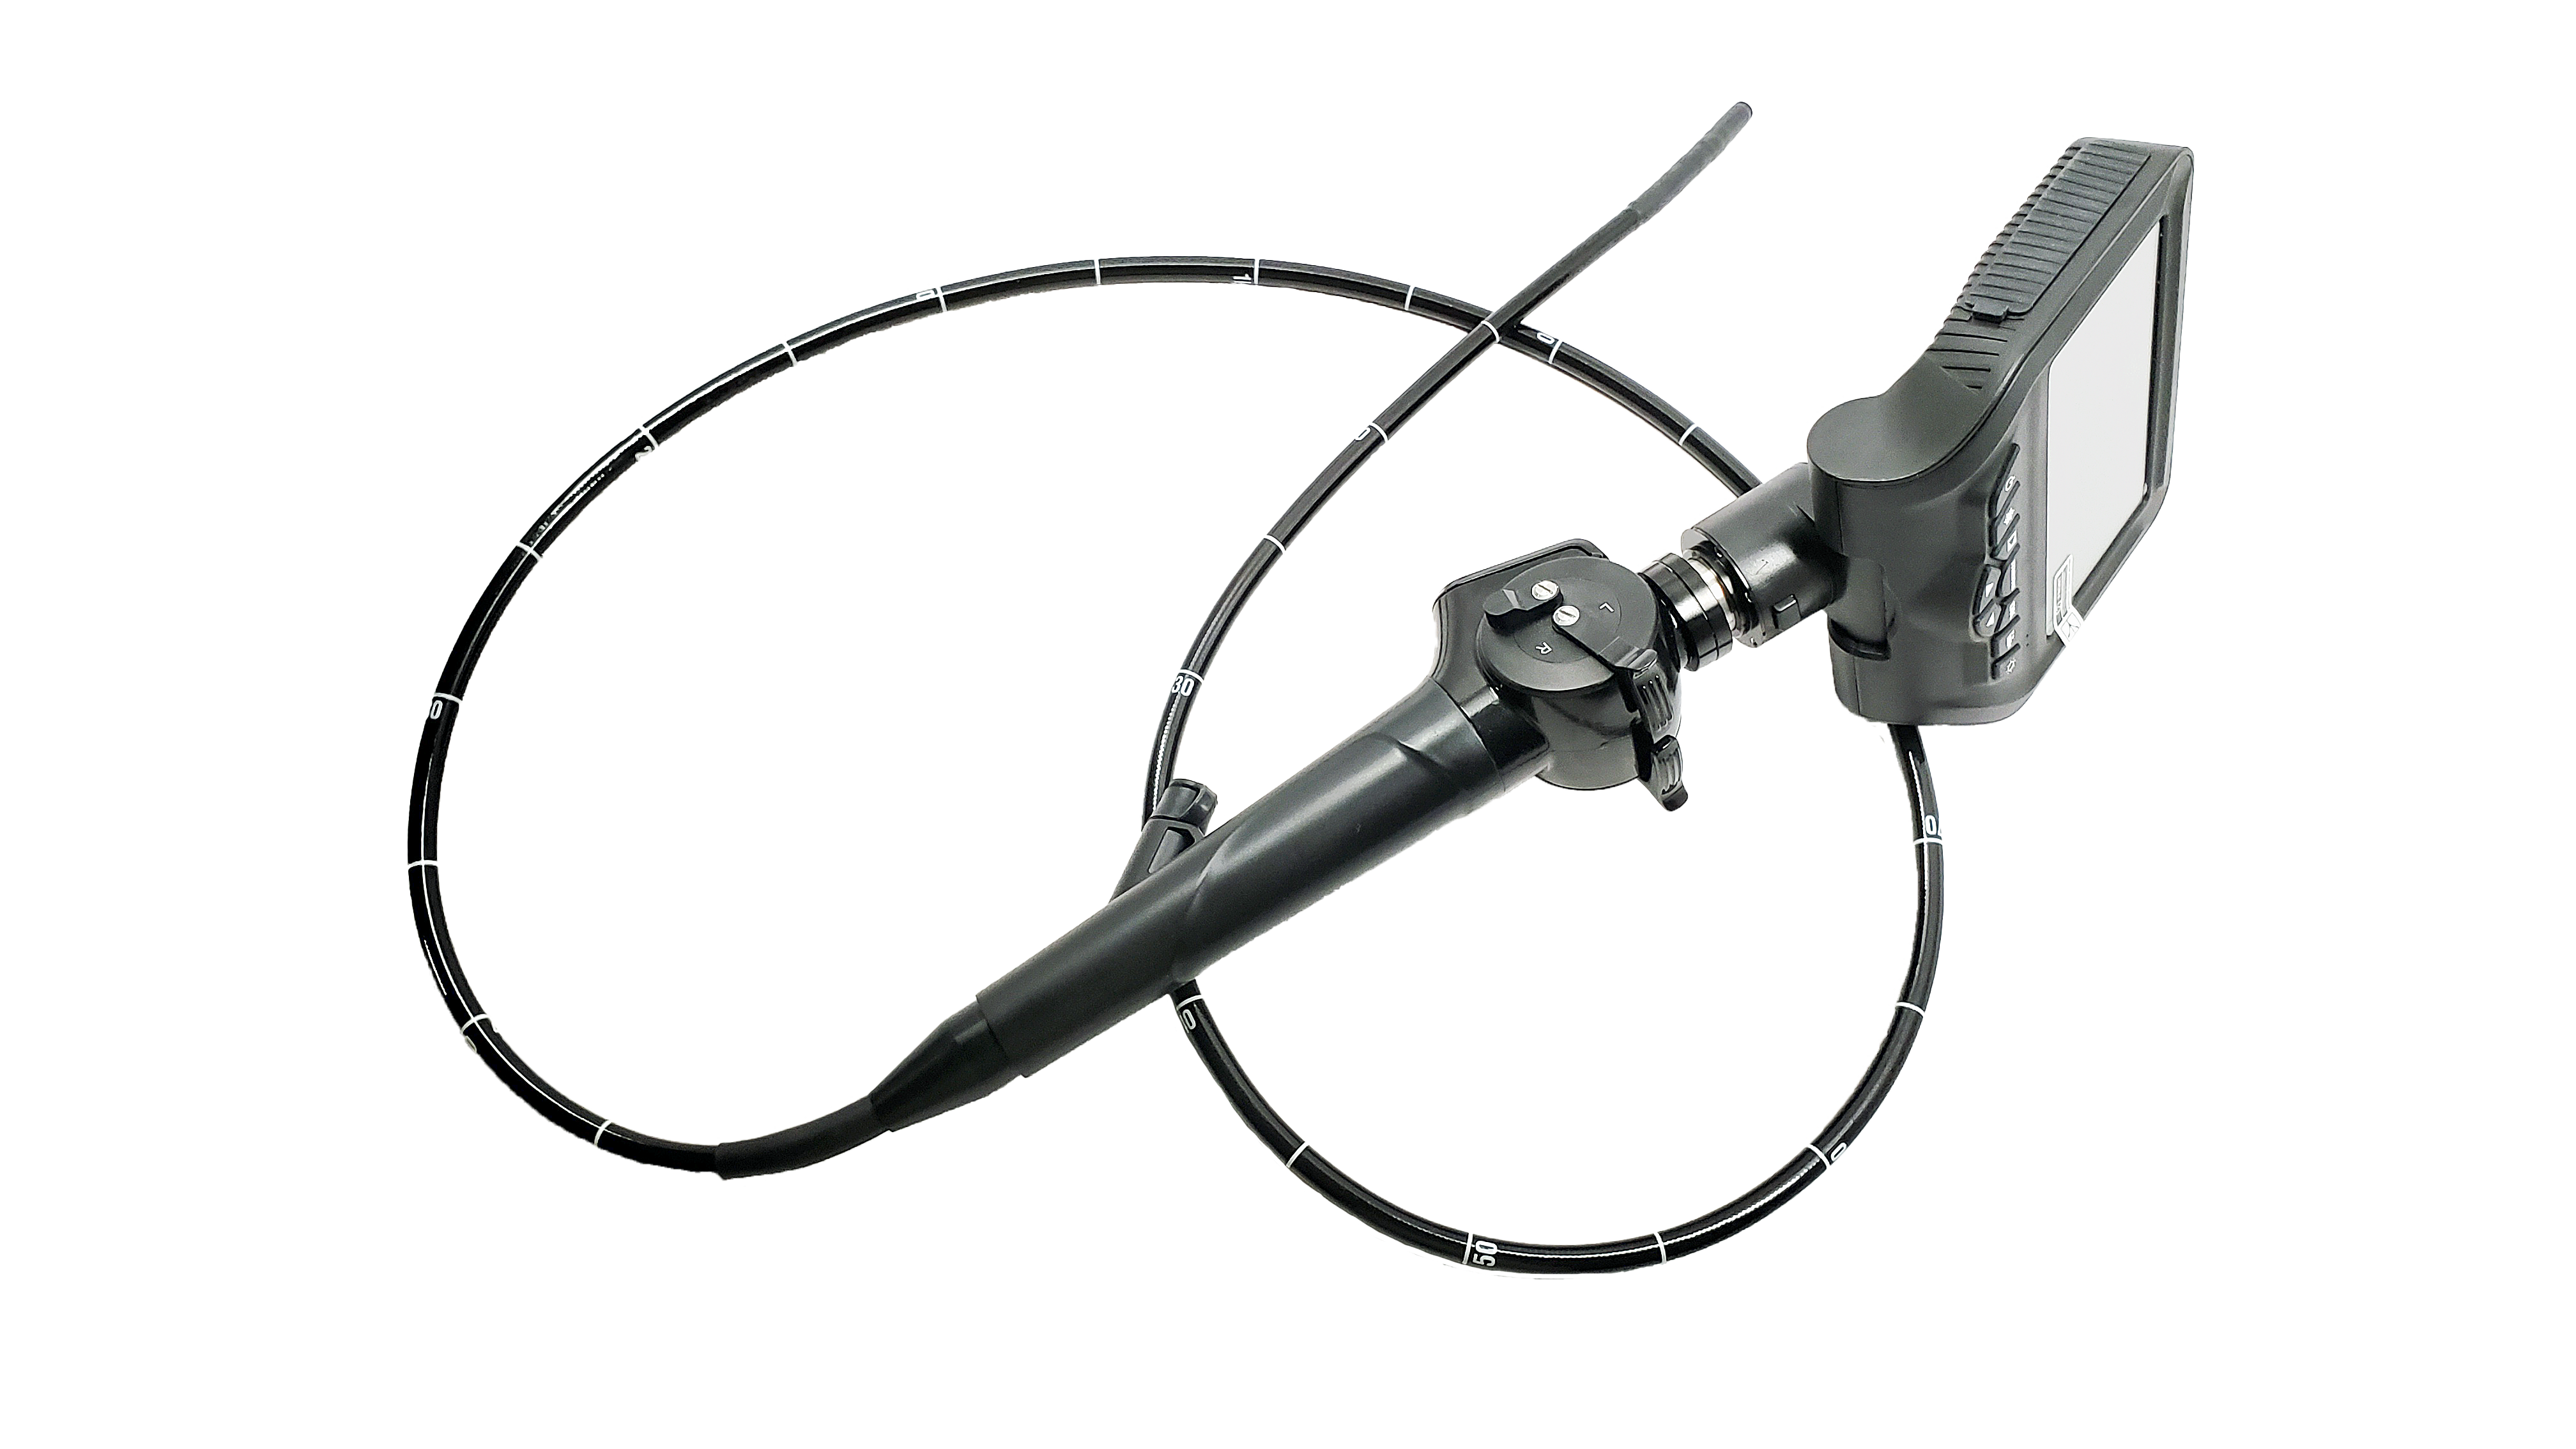 NEW Portable Veterinary Endoscope for Equine by Authorized Dealer 